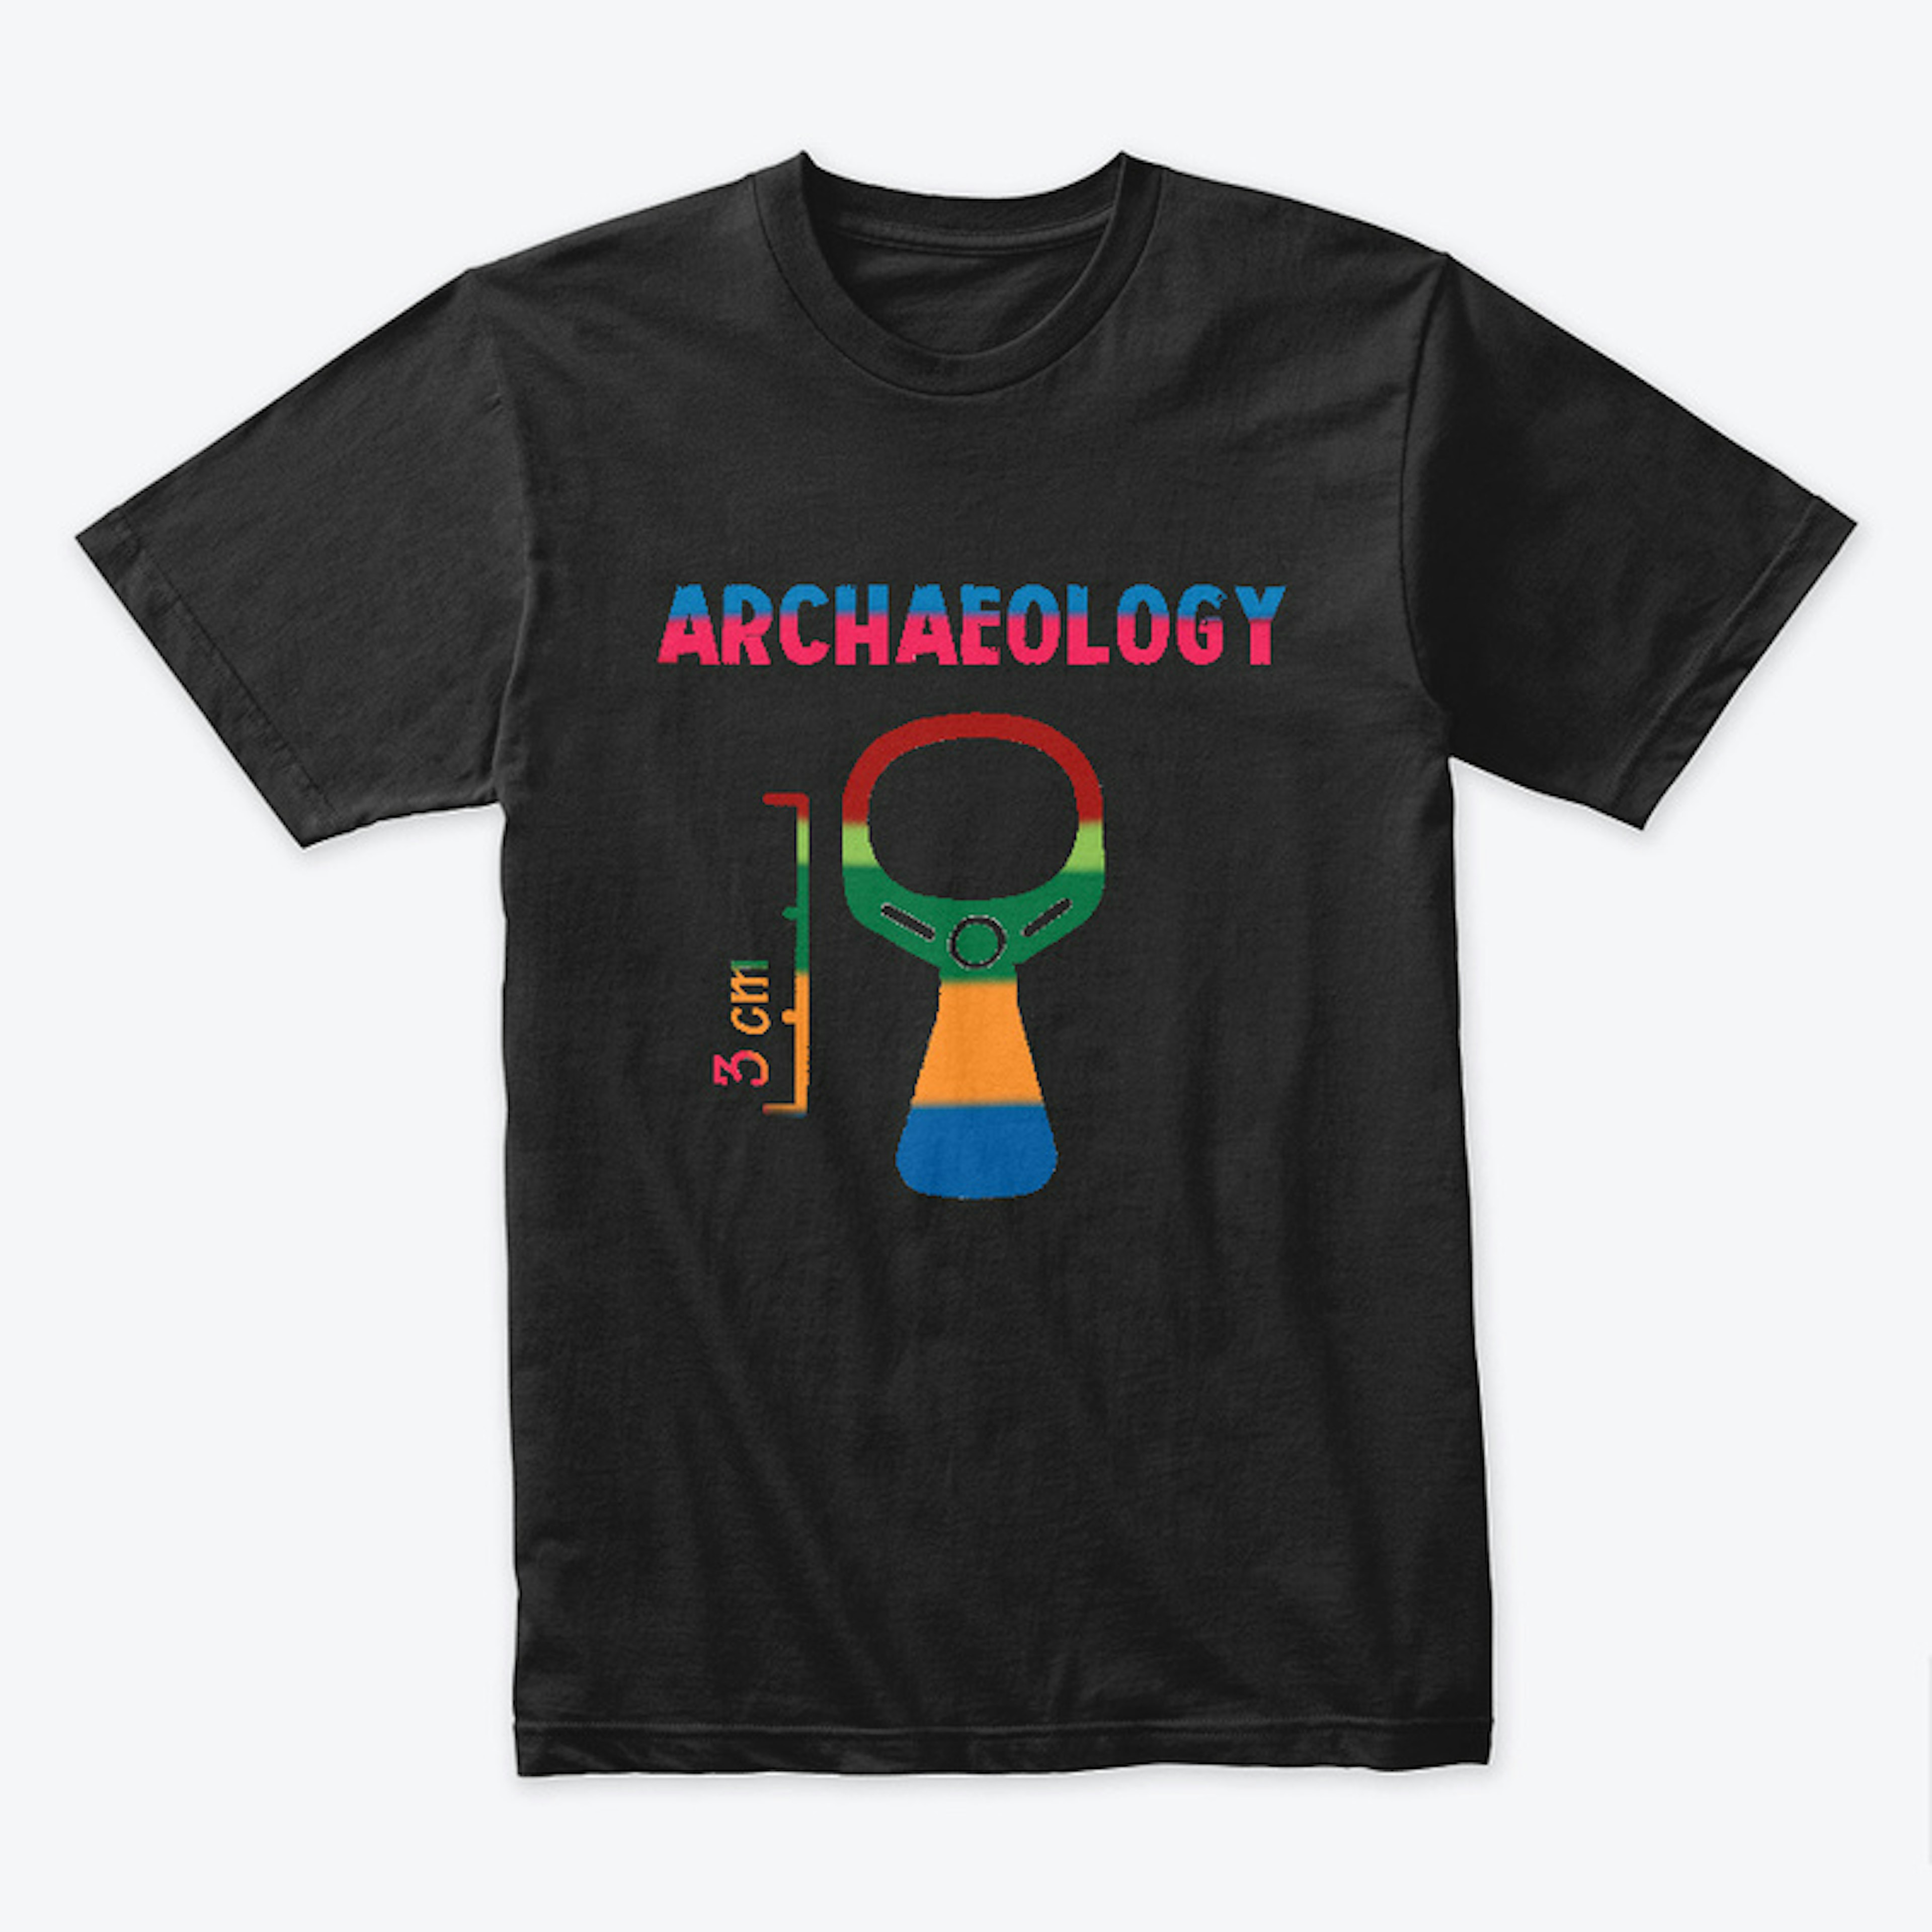 Pull Tab Archaeology Fanware